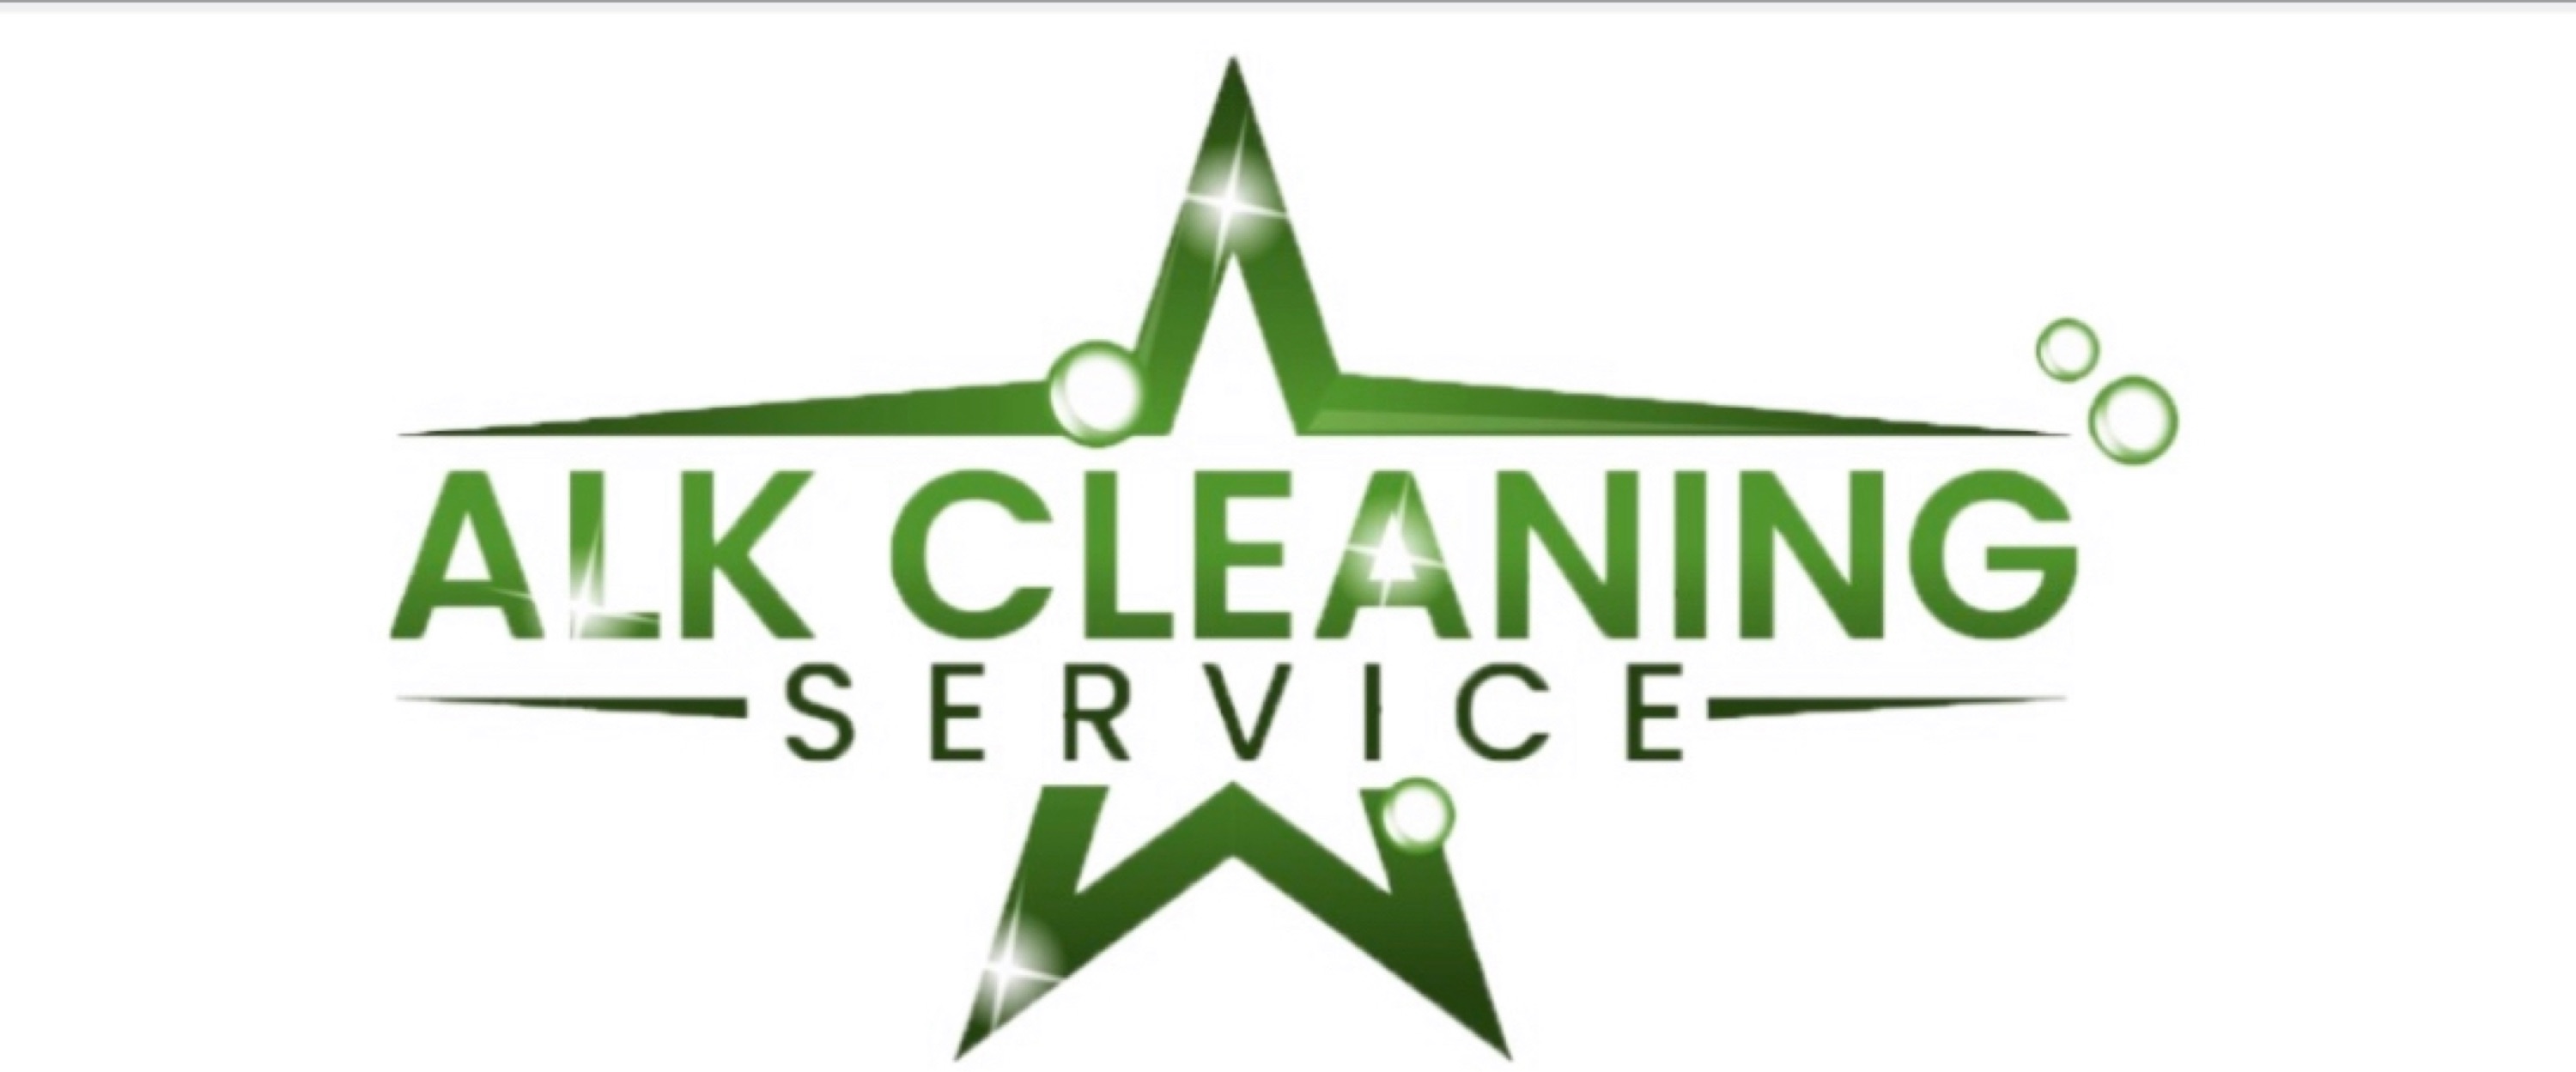 Alk Cleaning Service Logo